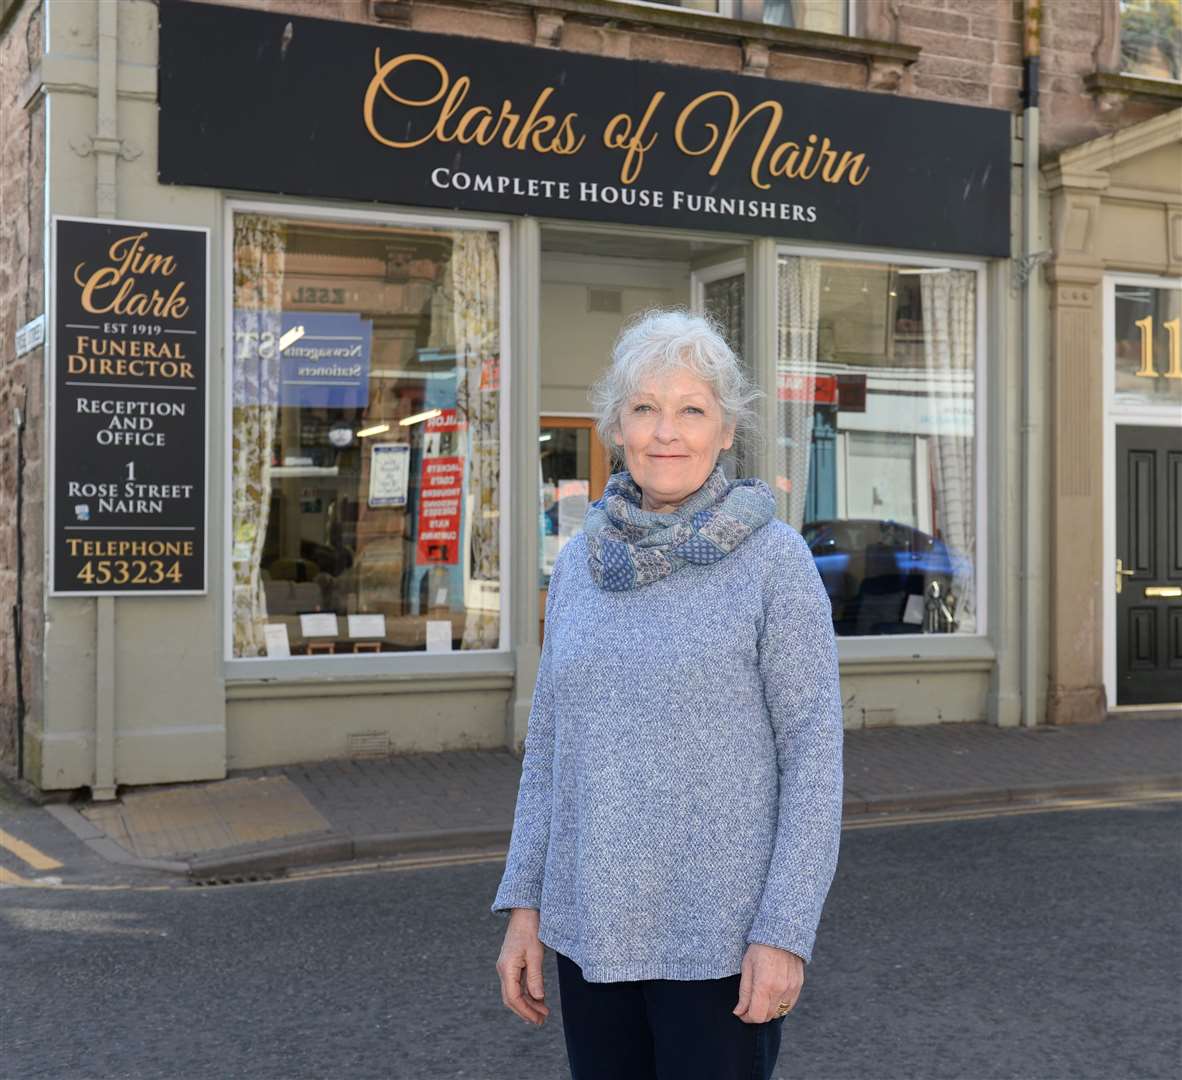 Paula Trowski of Clarks of Nairn which has been busy since reopening.